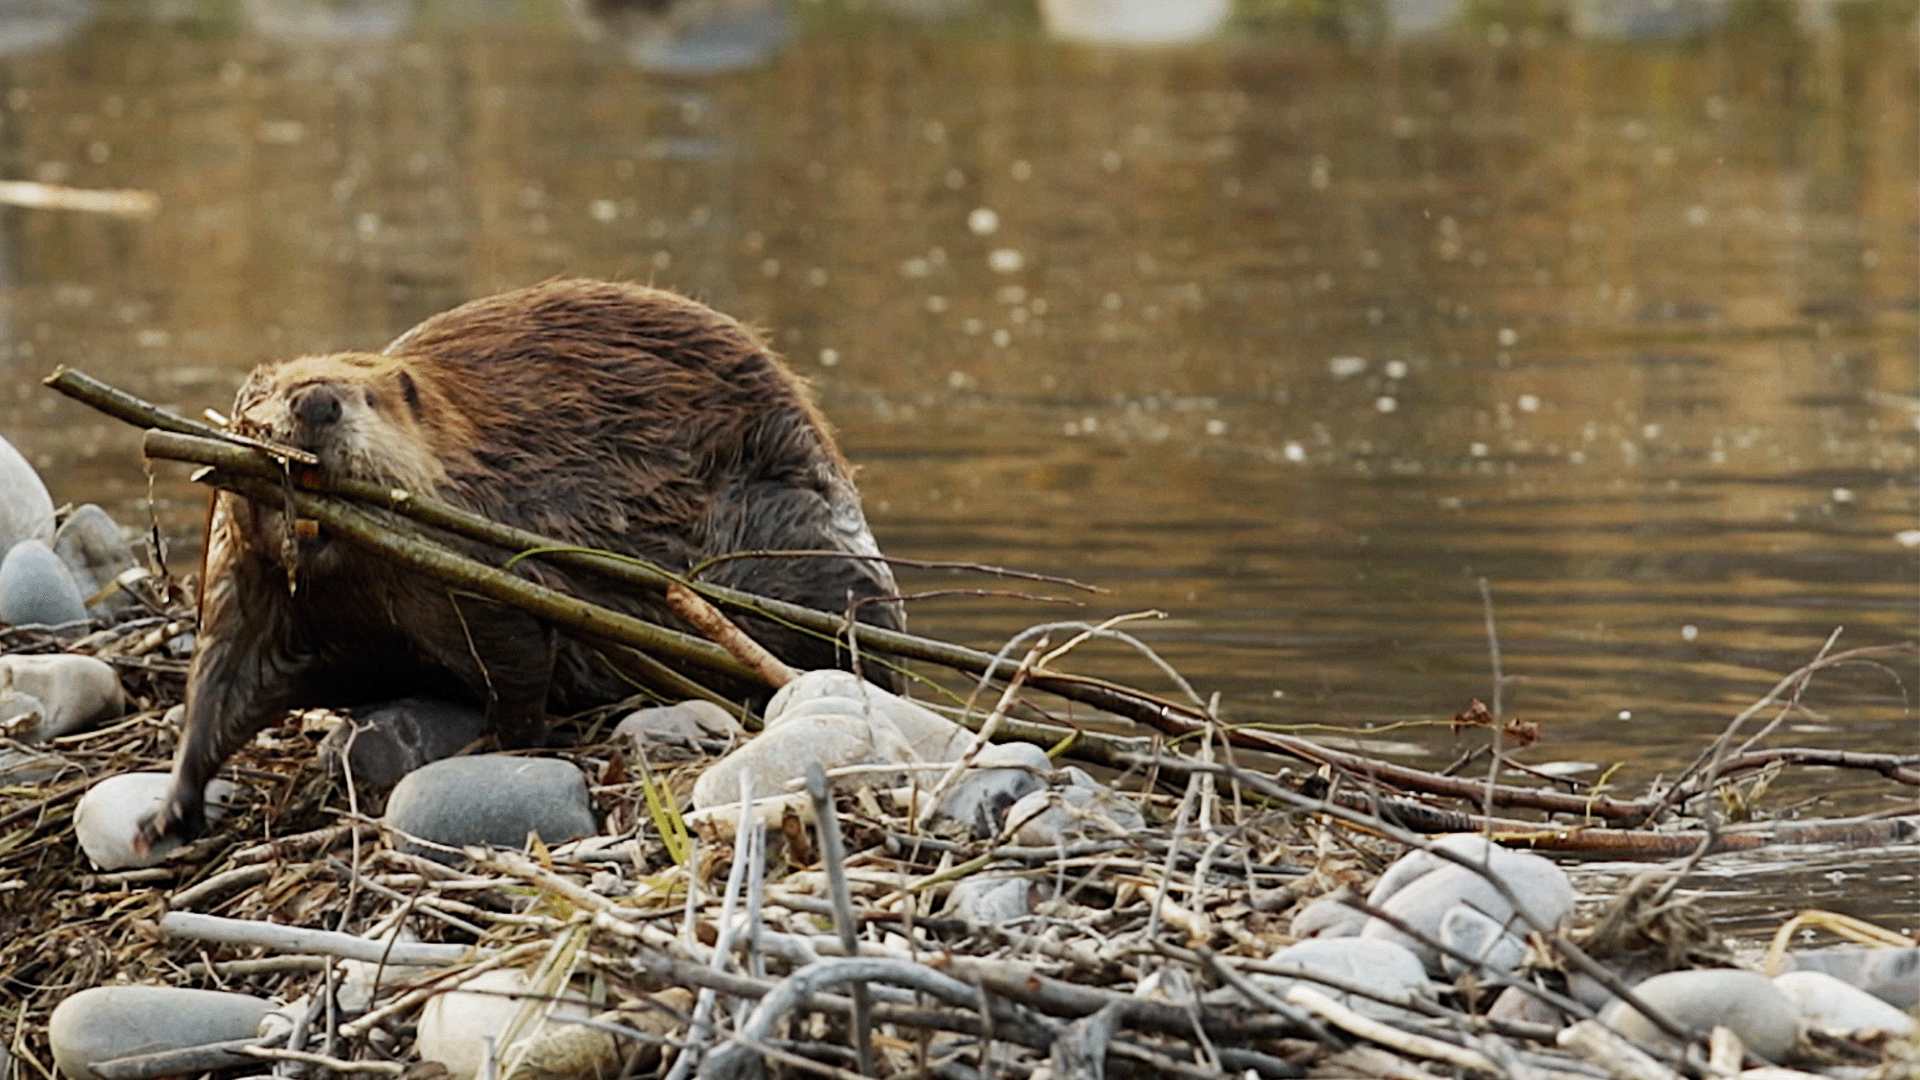 Beavers Are Good Engineers. Can We Use Them?